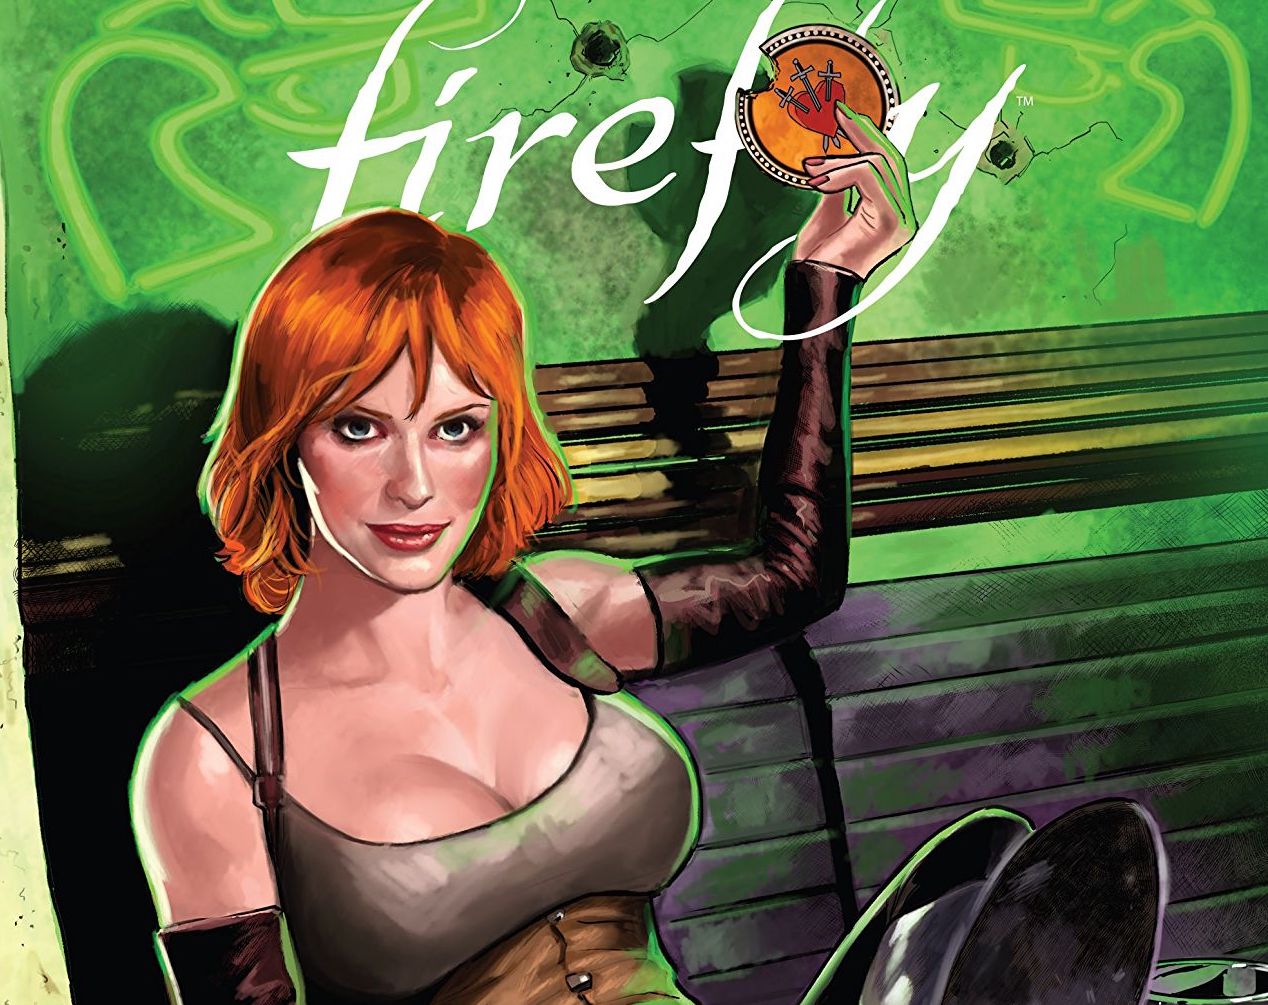 Firefly: Bad Company #1 Review